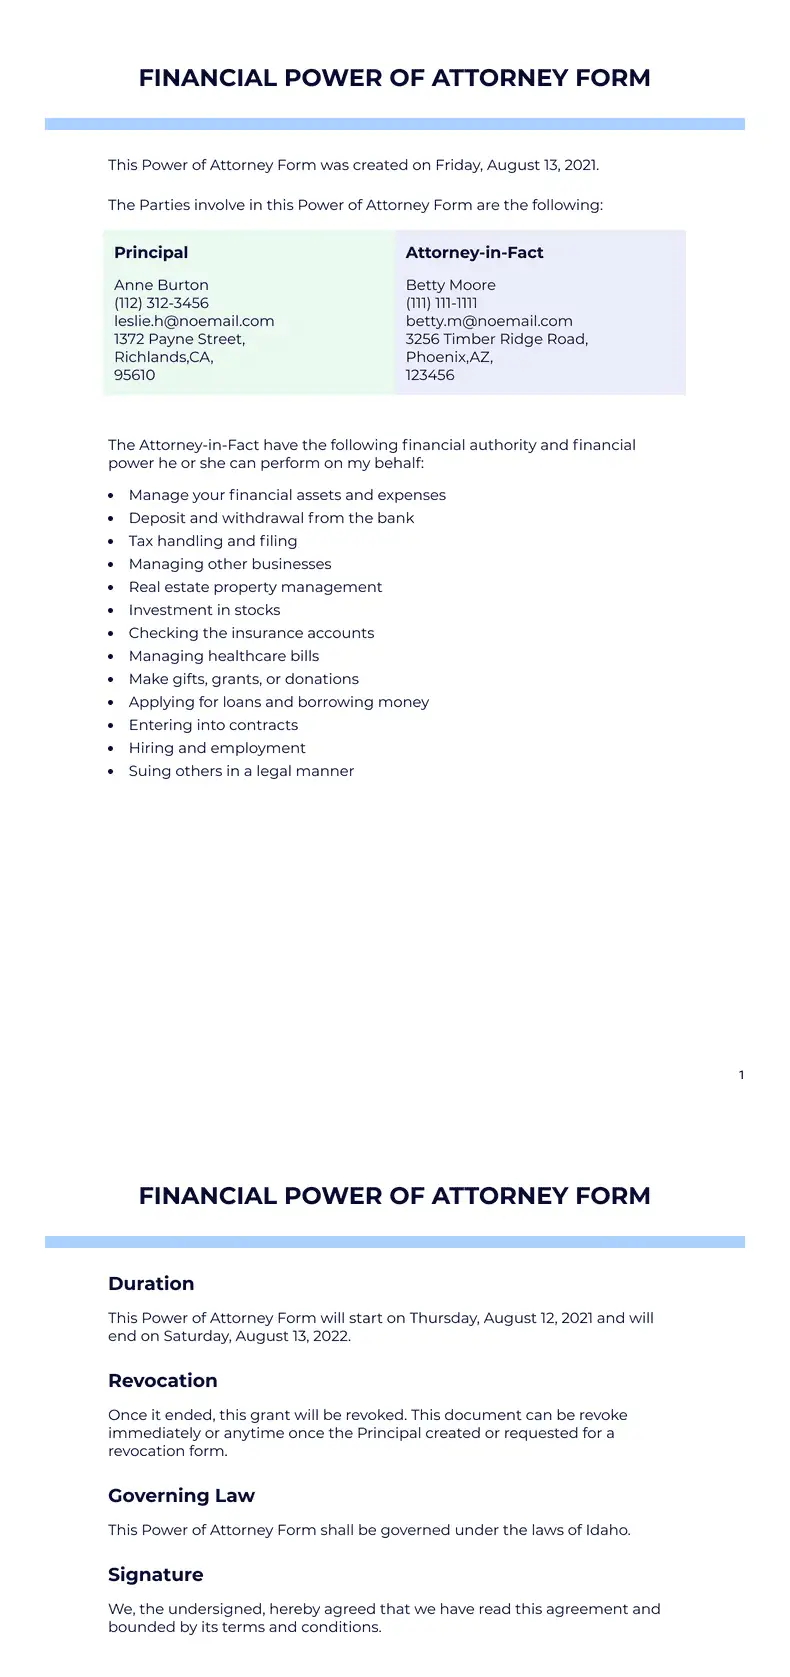 Financial Power of Attorney Form